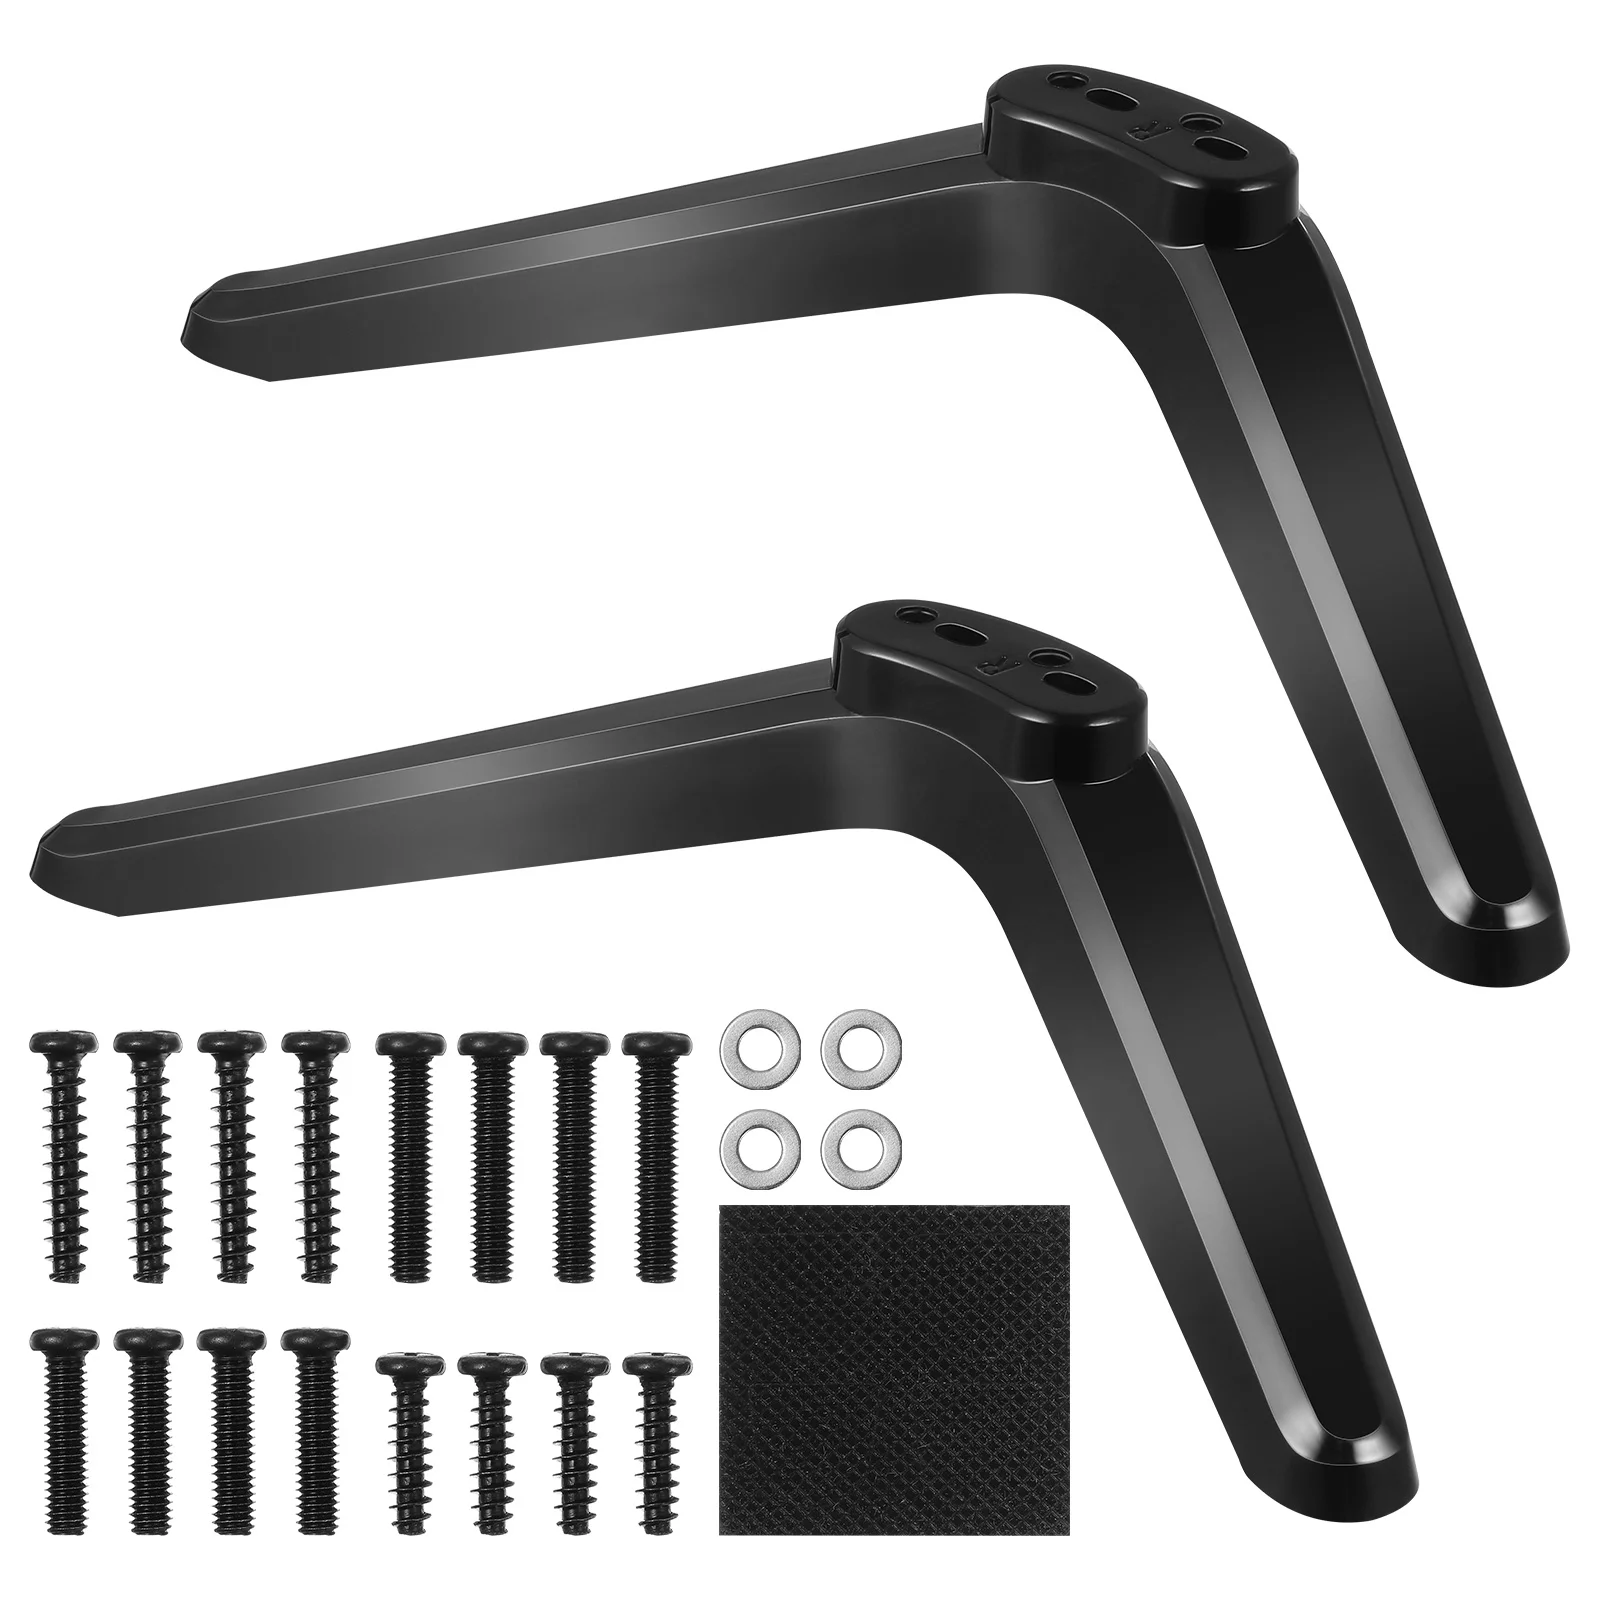 

2 Pcs Mount Stands Mounting Brackets Tabletop Holder Stand With Screws